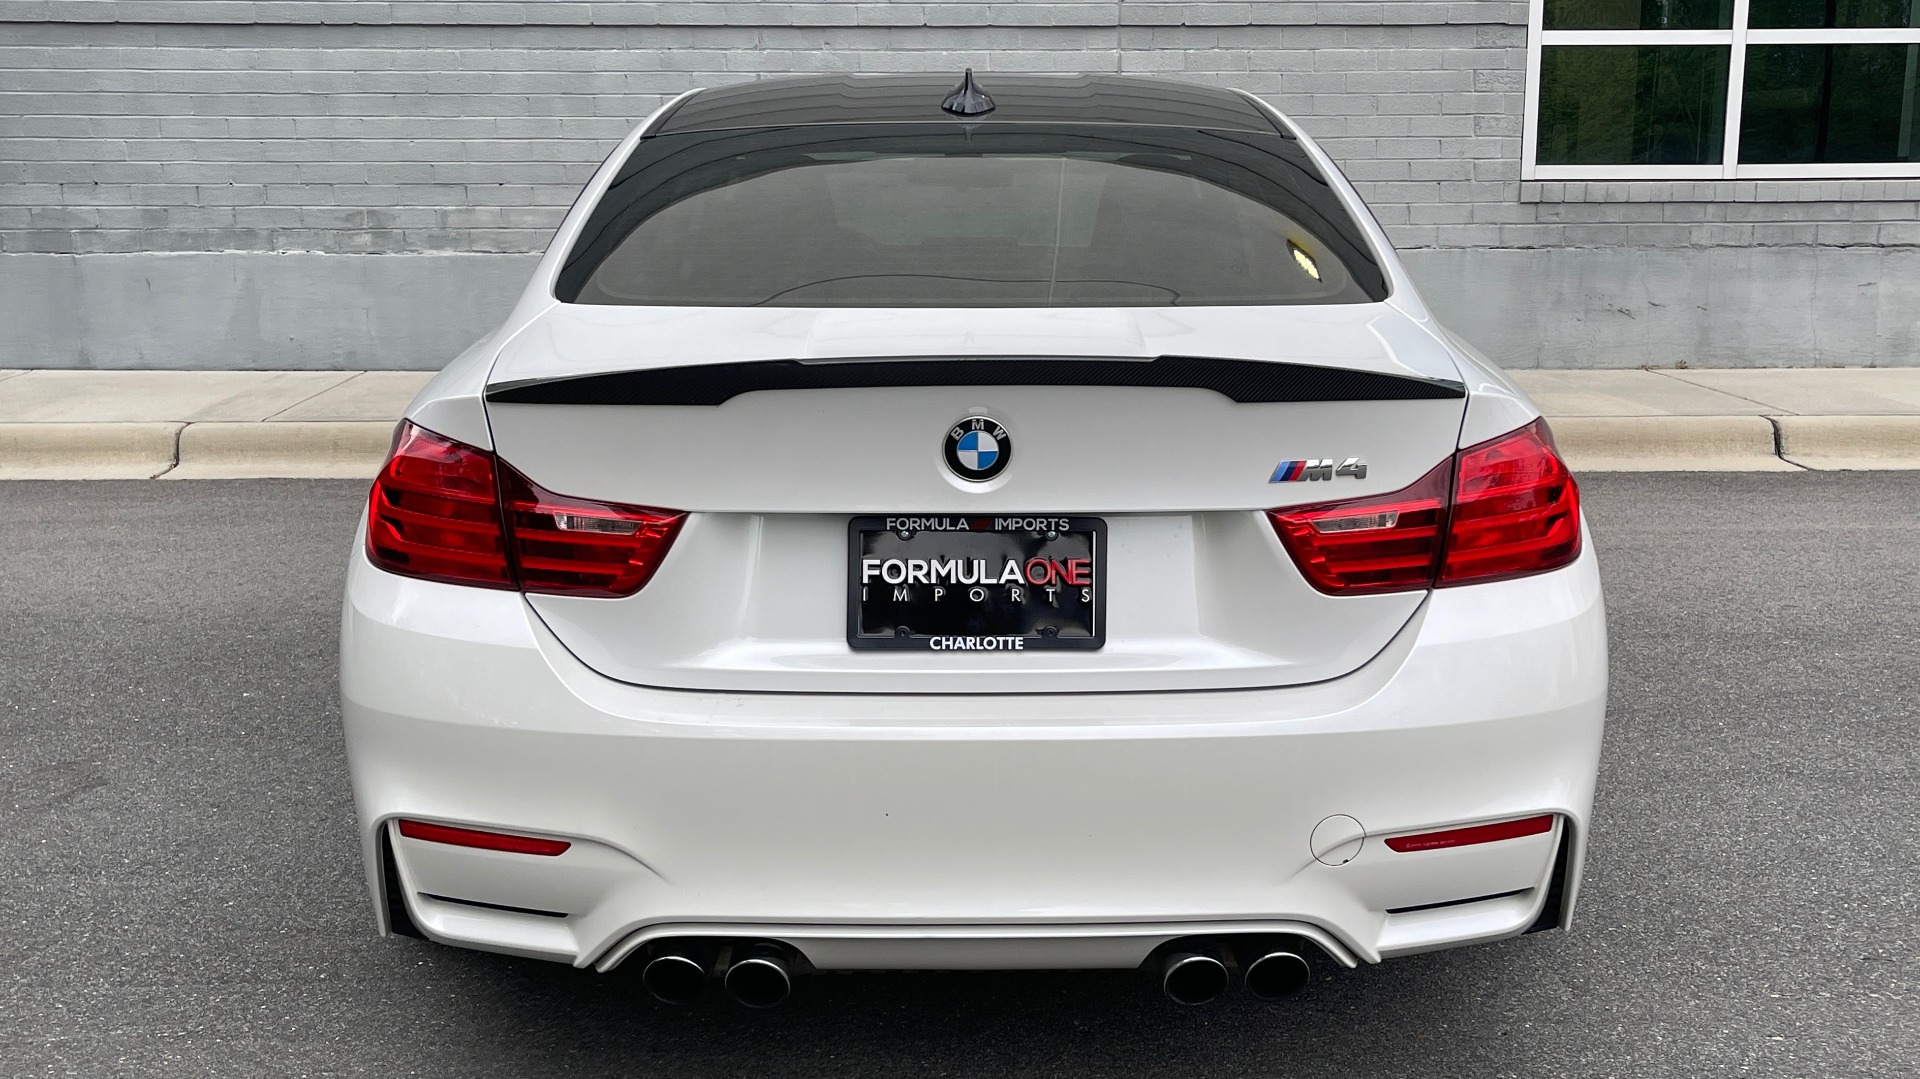 Used 2015 BMW M4 COUPE / 3.0L TURBO 425HP / 7-SPD AUTO / NAV / 19IN WHLS for sale Sold at Formula Imports in Charlotte NC 28227 4